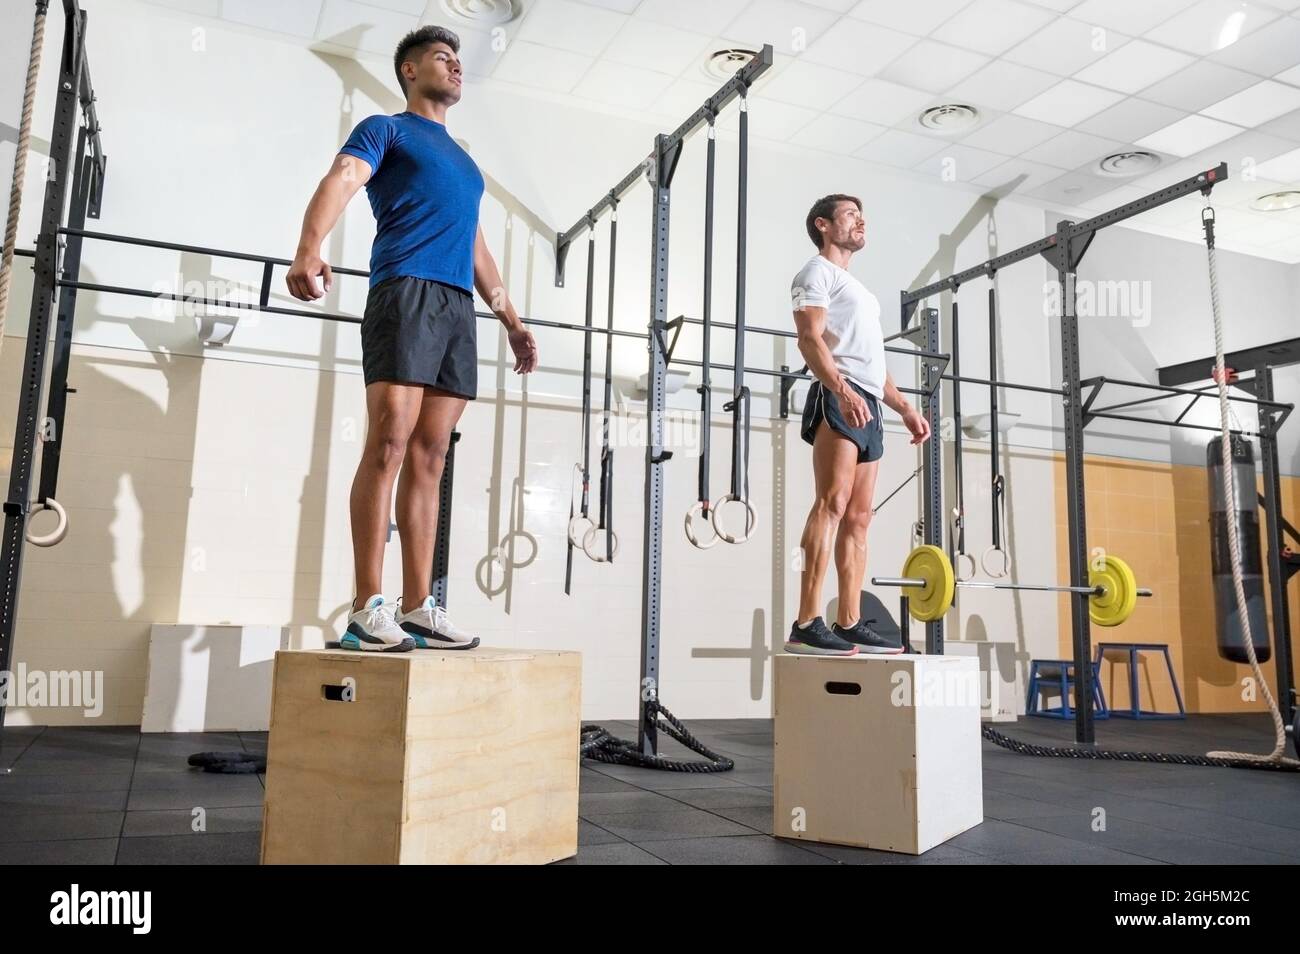 Page 2 - Box Jump Exercise High Resolution Stock Photography and Images -  Alamy